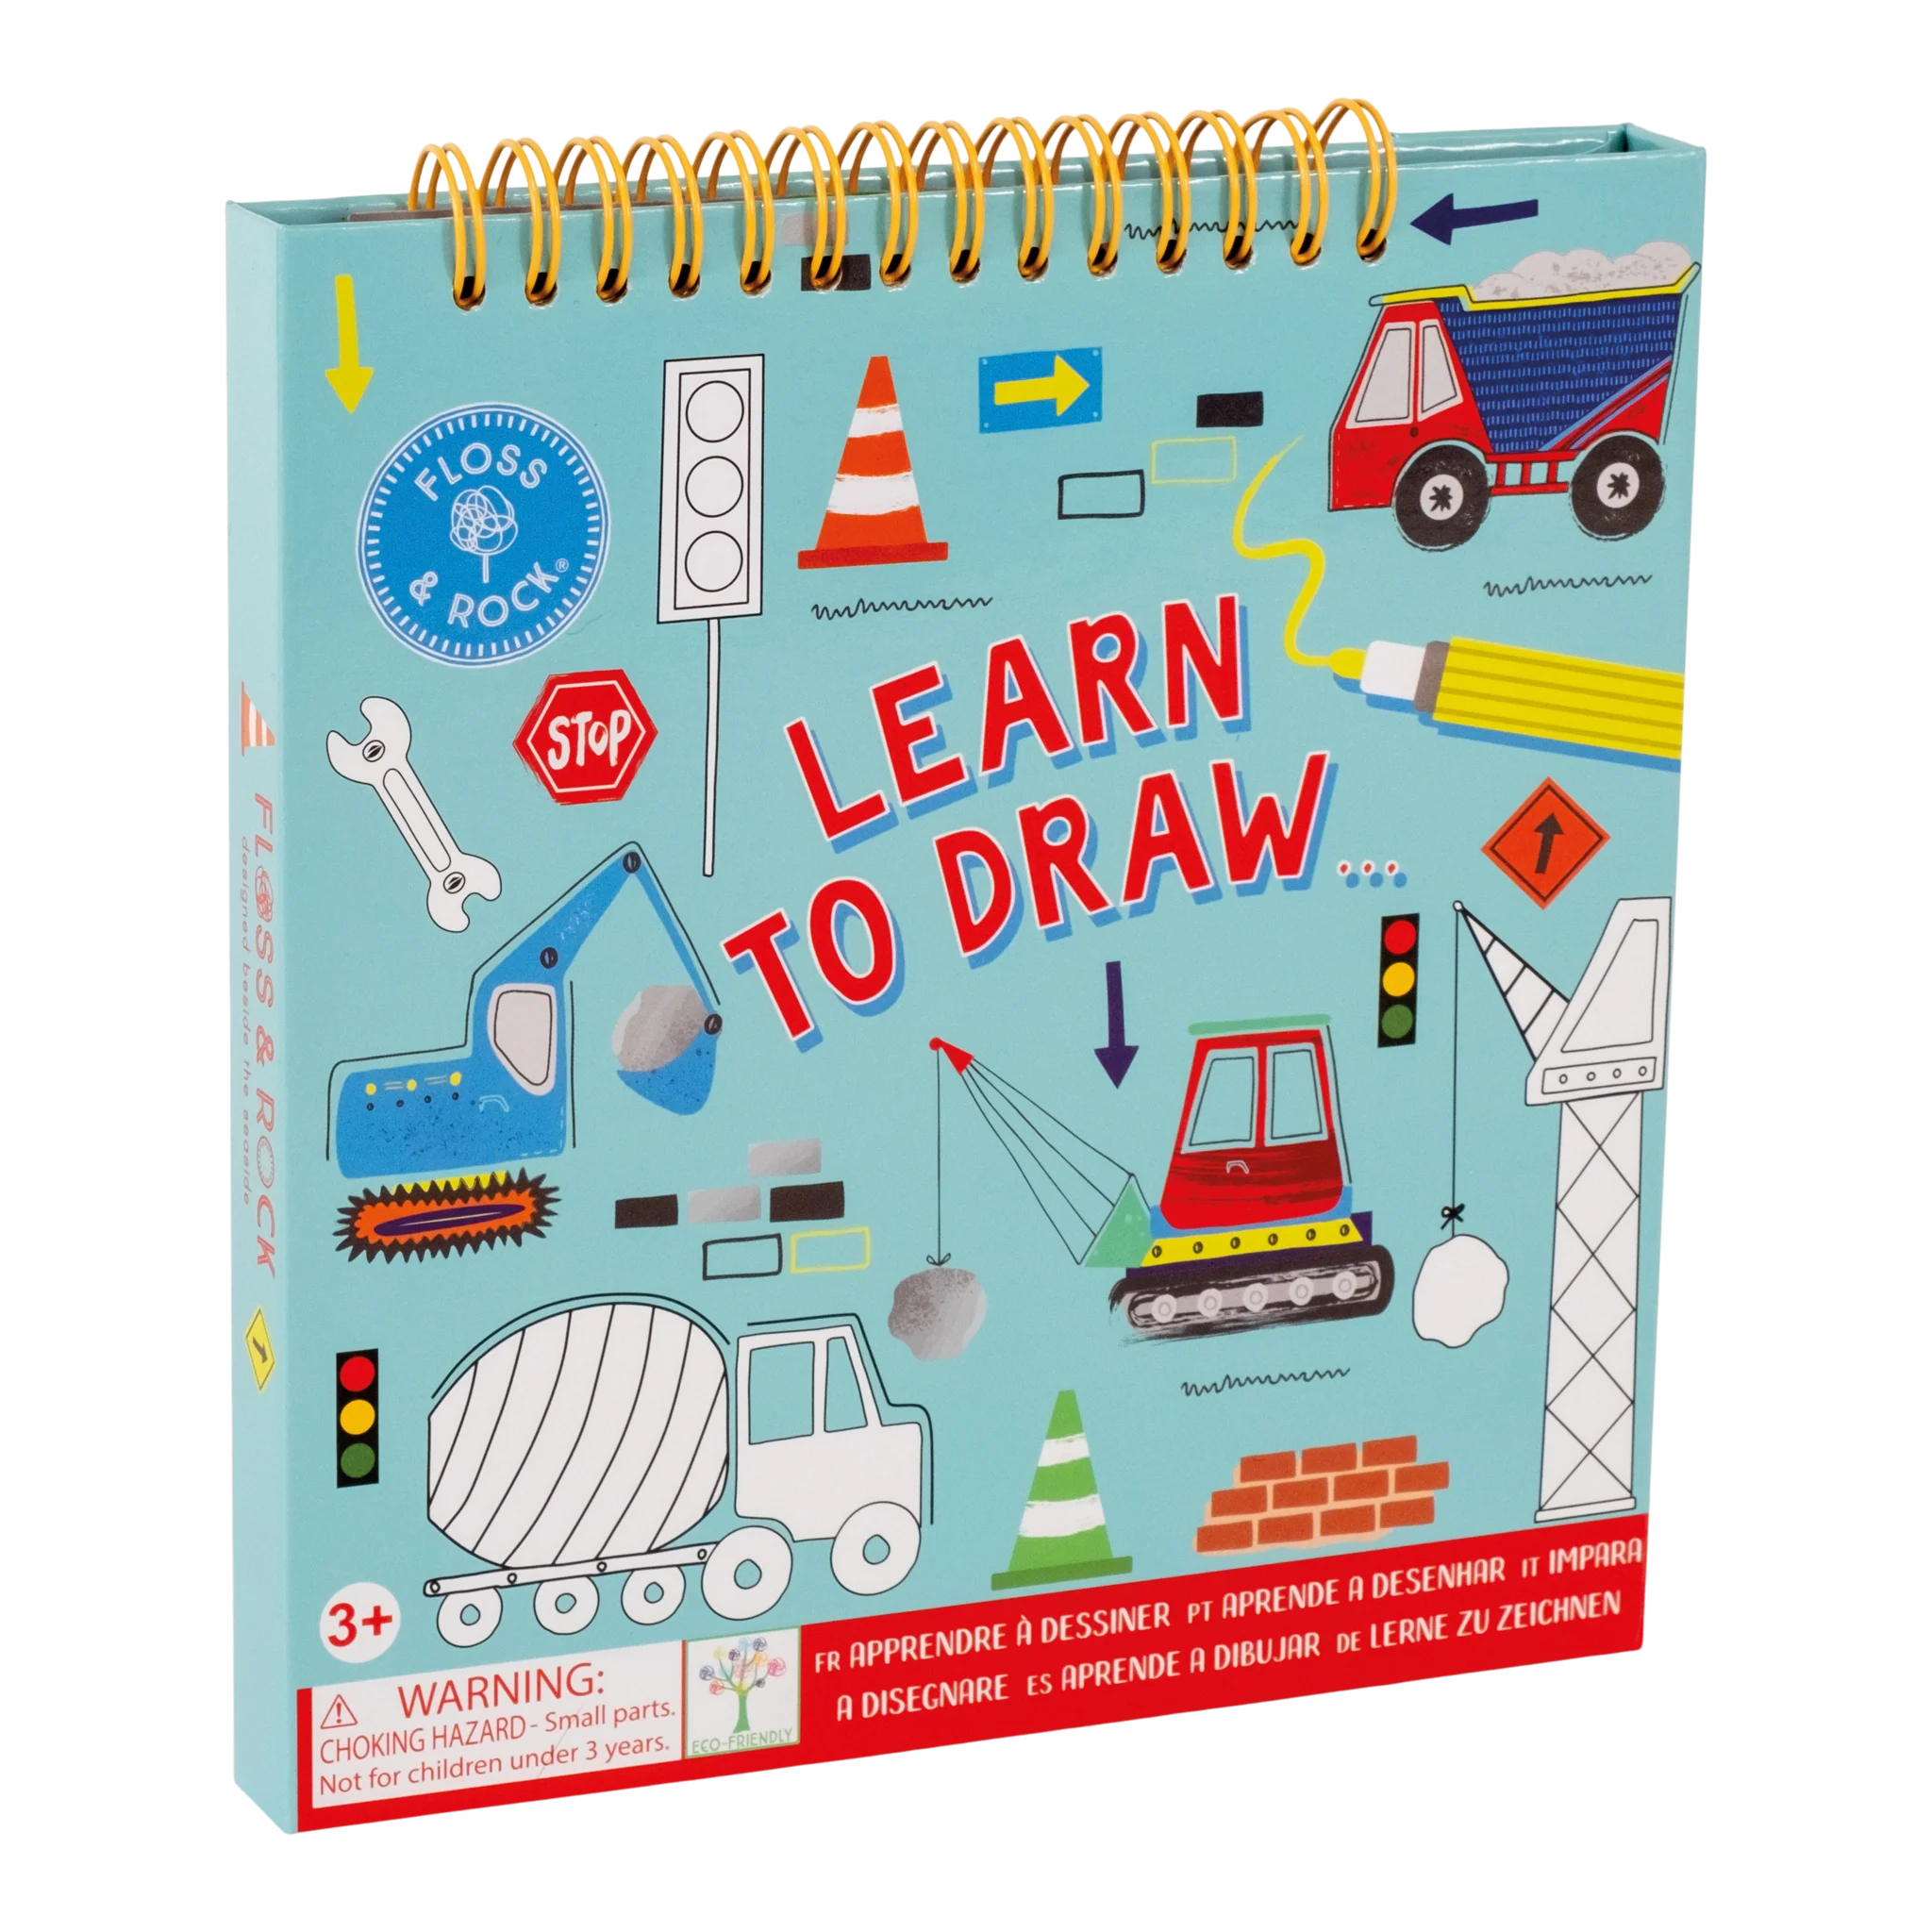 Floss & Rock Learn To Draw – Construction